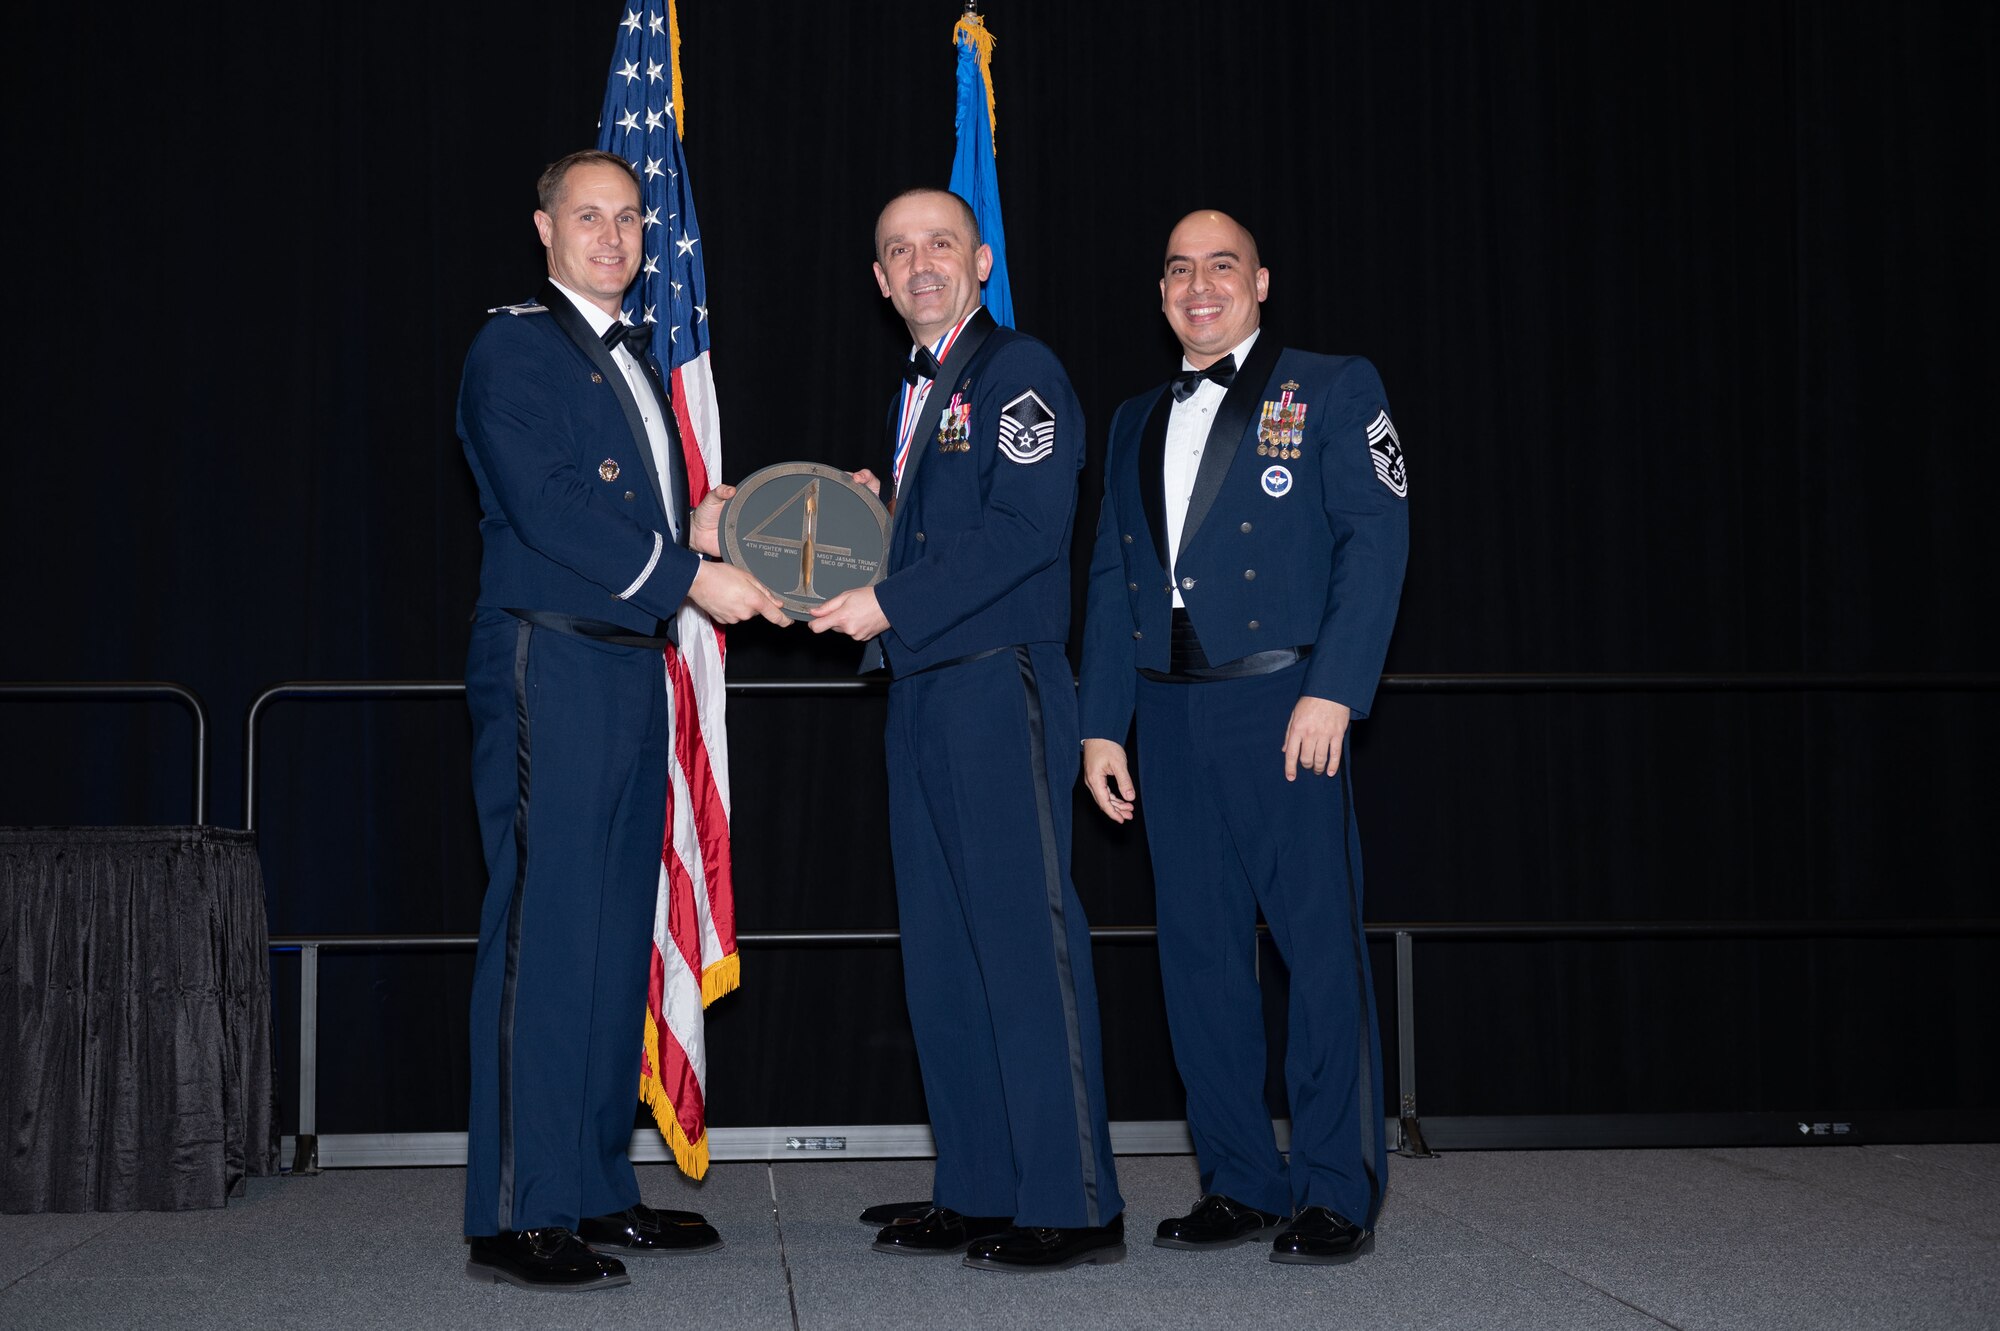 Master Sgt. Jasmin Trumic, center, 4th Healthcare Operations Squadron super intendent, receives the Senior Non-commissioned Officer of the Year Award from Col. Lucas Teel, 4th Fighter Wing commander, and Chief Master Sgt. Peter Martinez, 4th FW command chief, during the 2022 Annual Awards ceremony at the Maxwell Center, Goldsboro, North Carolina, Feb. 3, 2023. Annual awards are awarded to Airmen and civilians in 13 different categories, including Volunteer of the Year, senior non-commissioned officer of the year, Key Spouse of the Year, Airman of the Year and more. (U.S. Air Force photo by Rebecca Sirimarco-Lang)